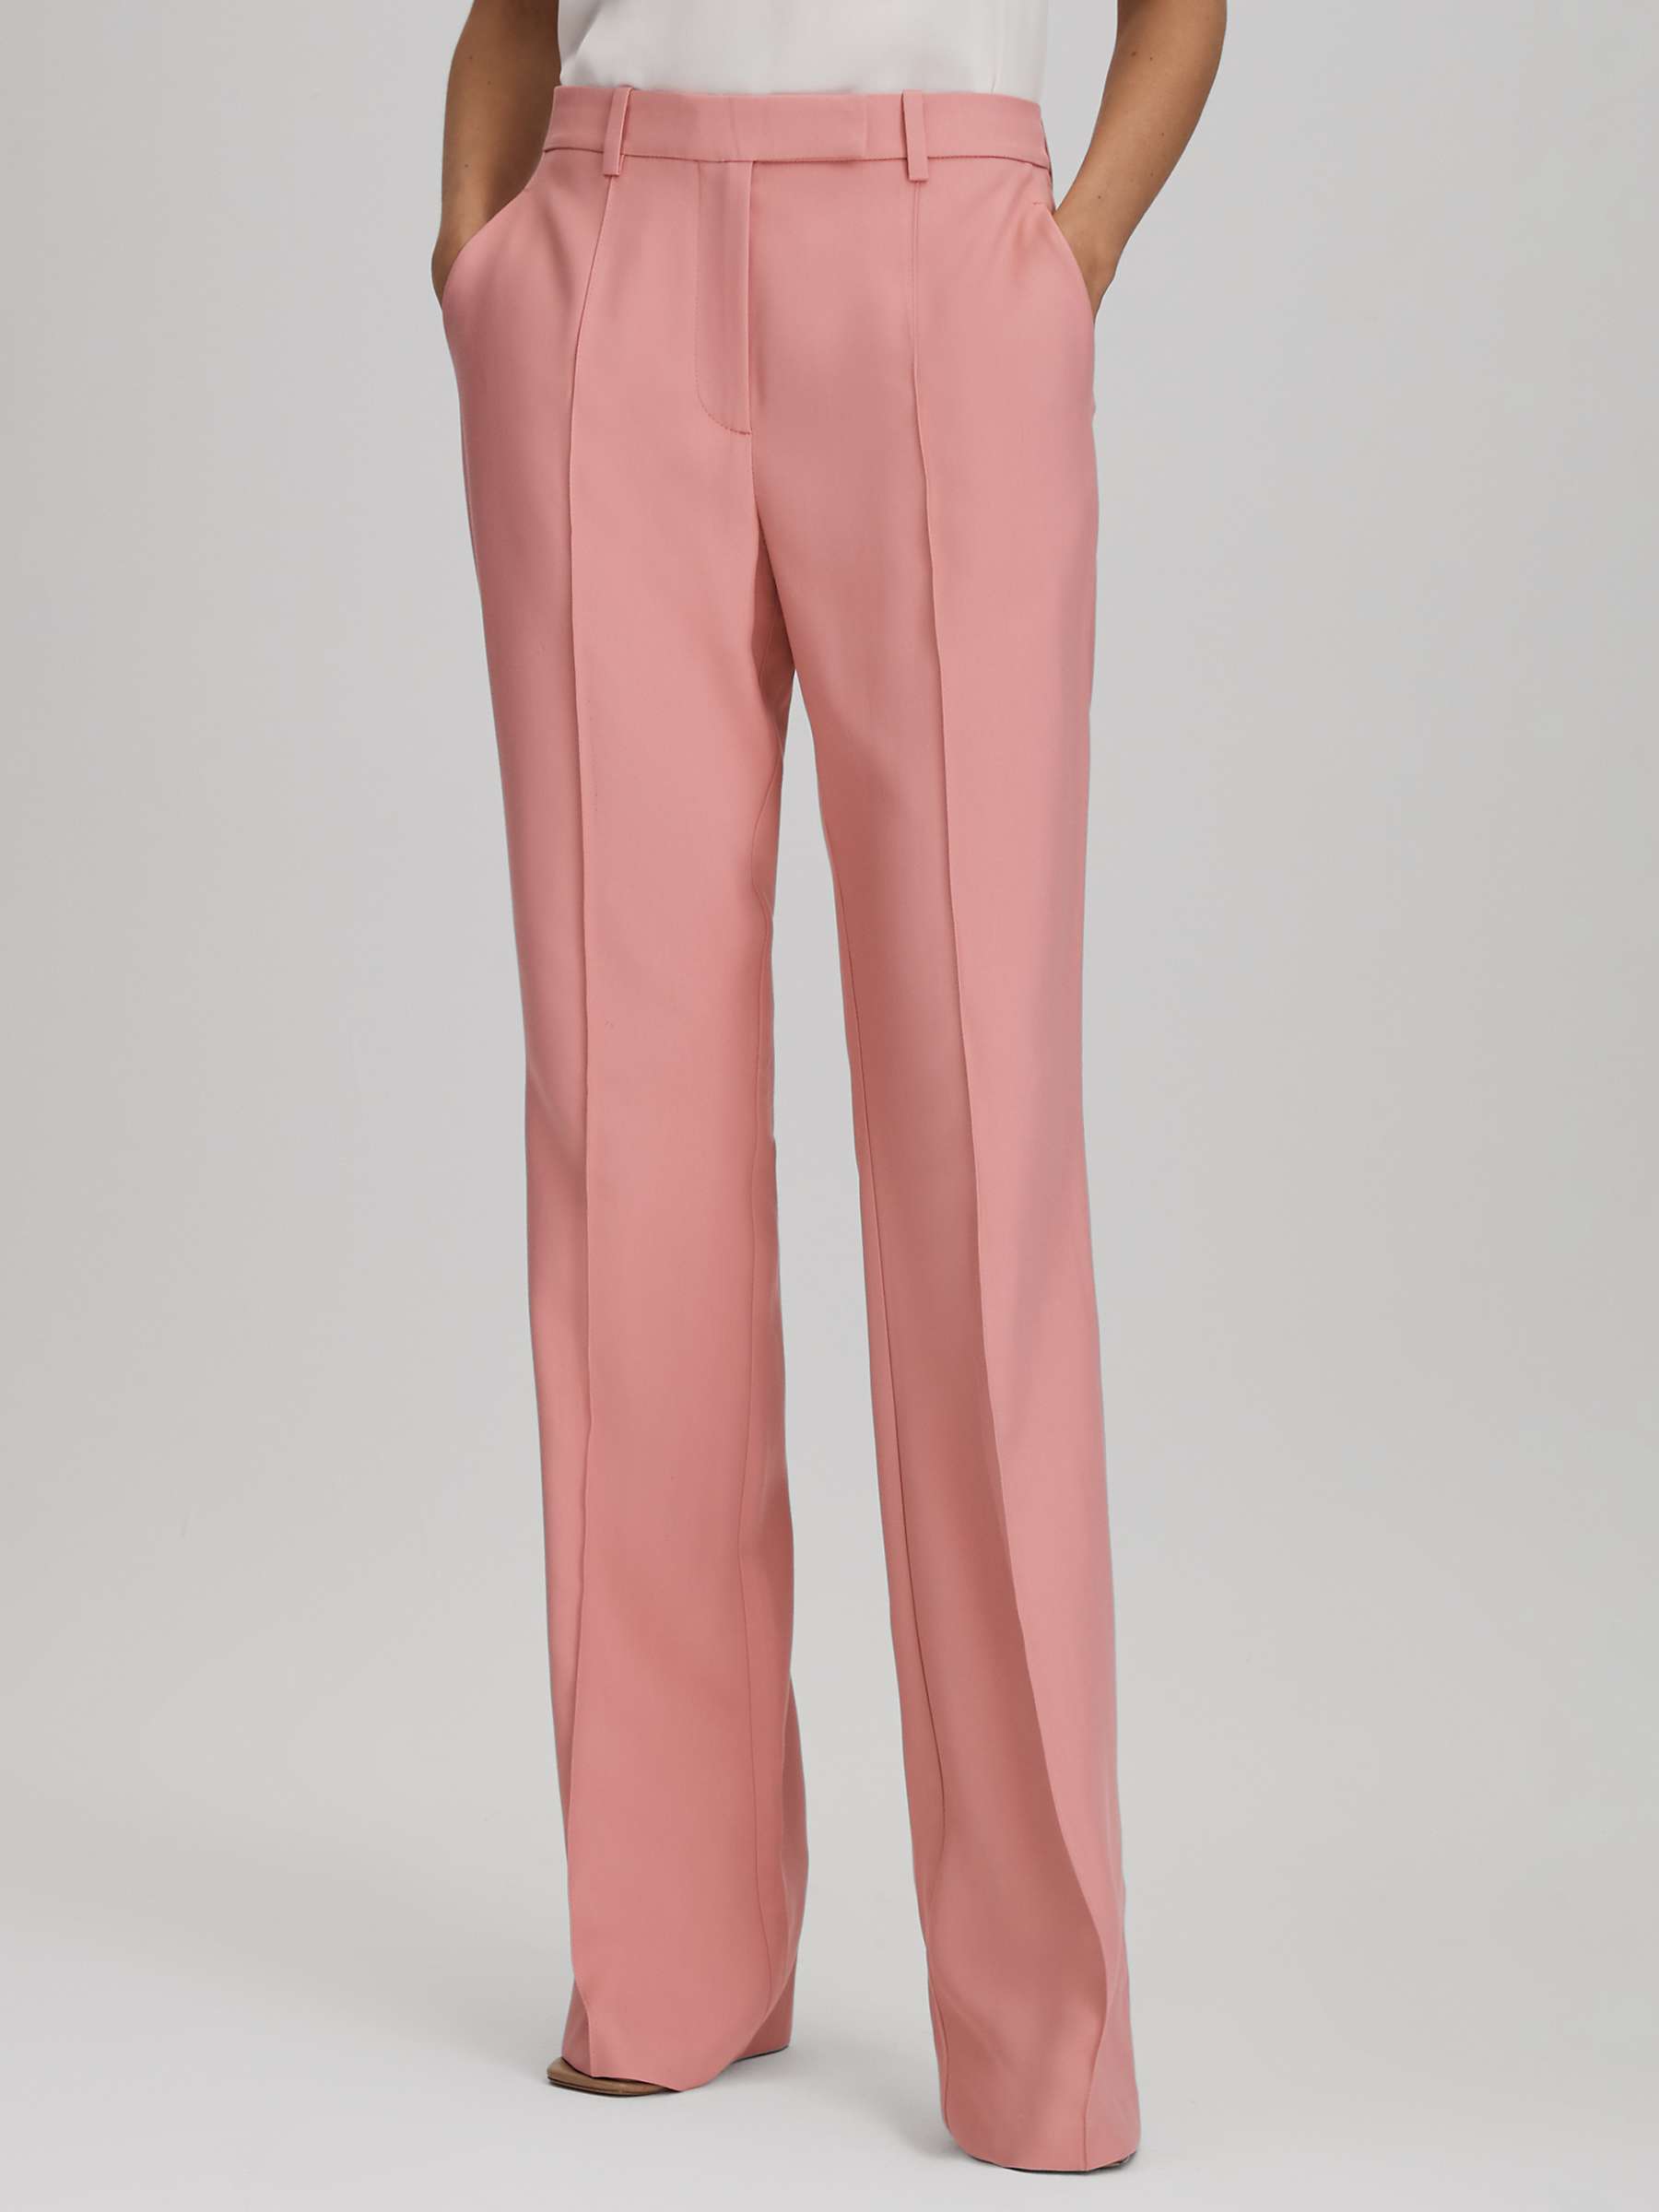 Buy Reiss Petite Millie Flared Tailored Trousers Online at johnlewis.com